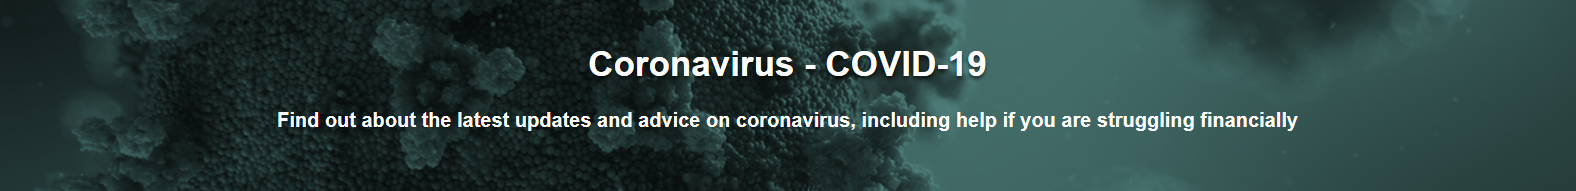 Updates and advice on coronavirus, including help if you are struggling financially